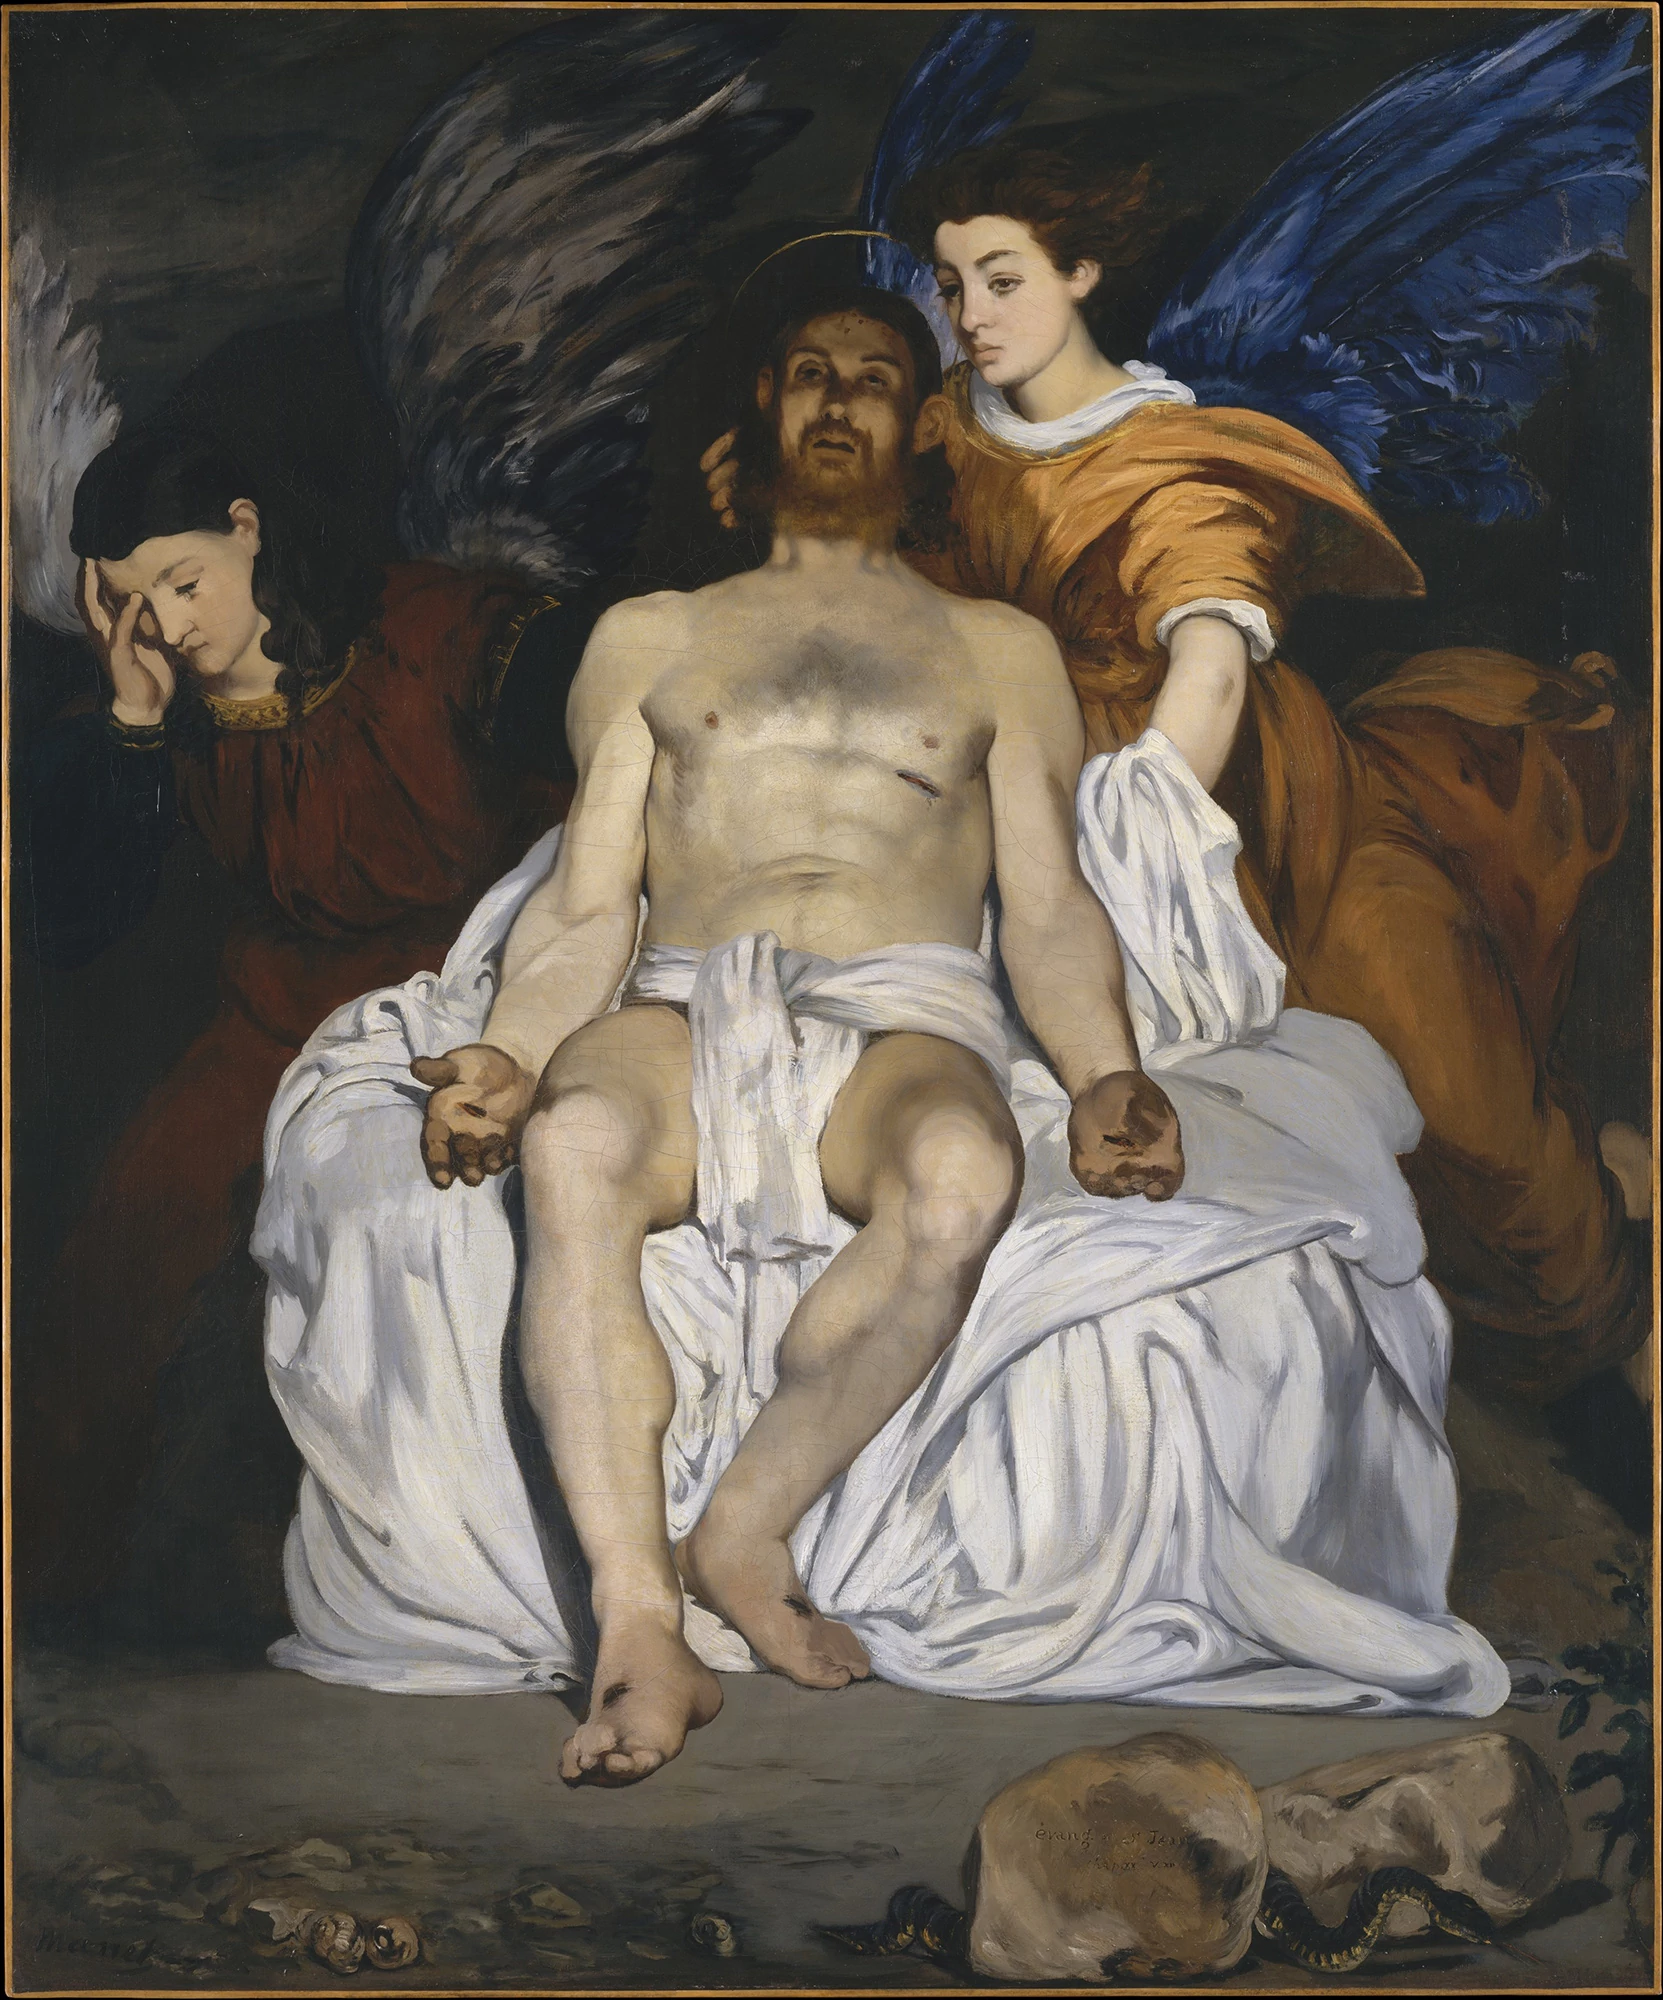 The Dead Christ with Angels, Édouard Manet